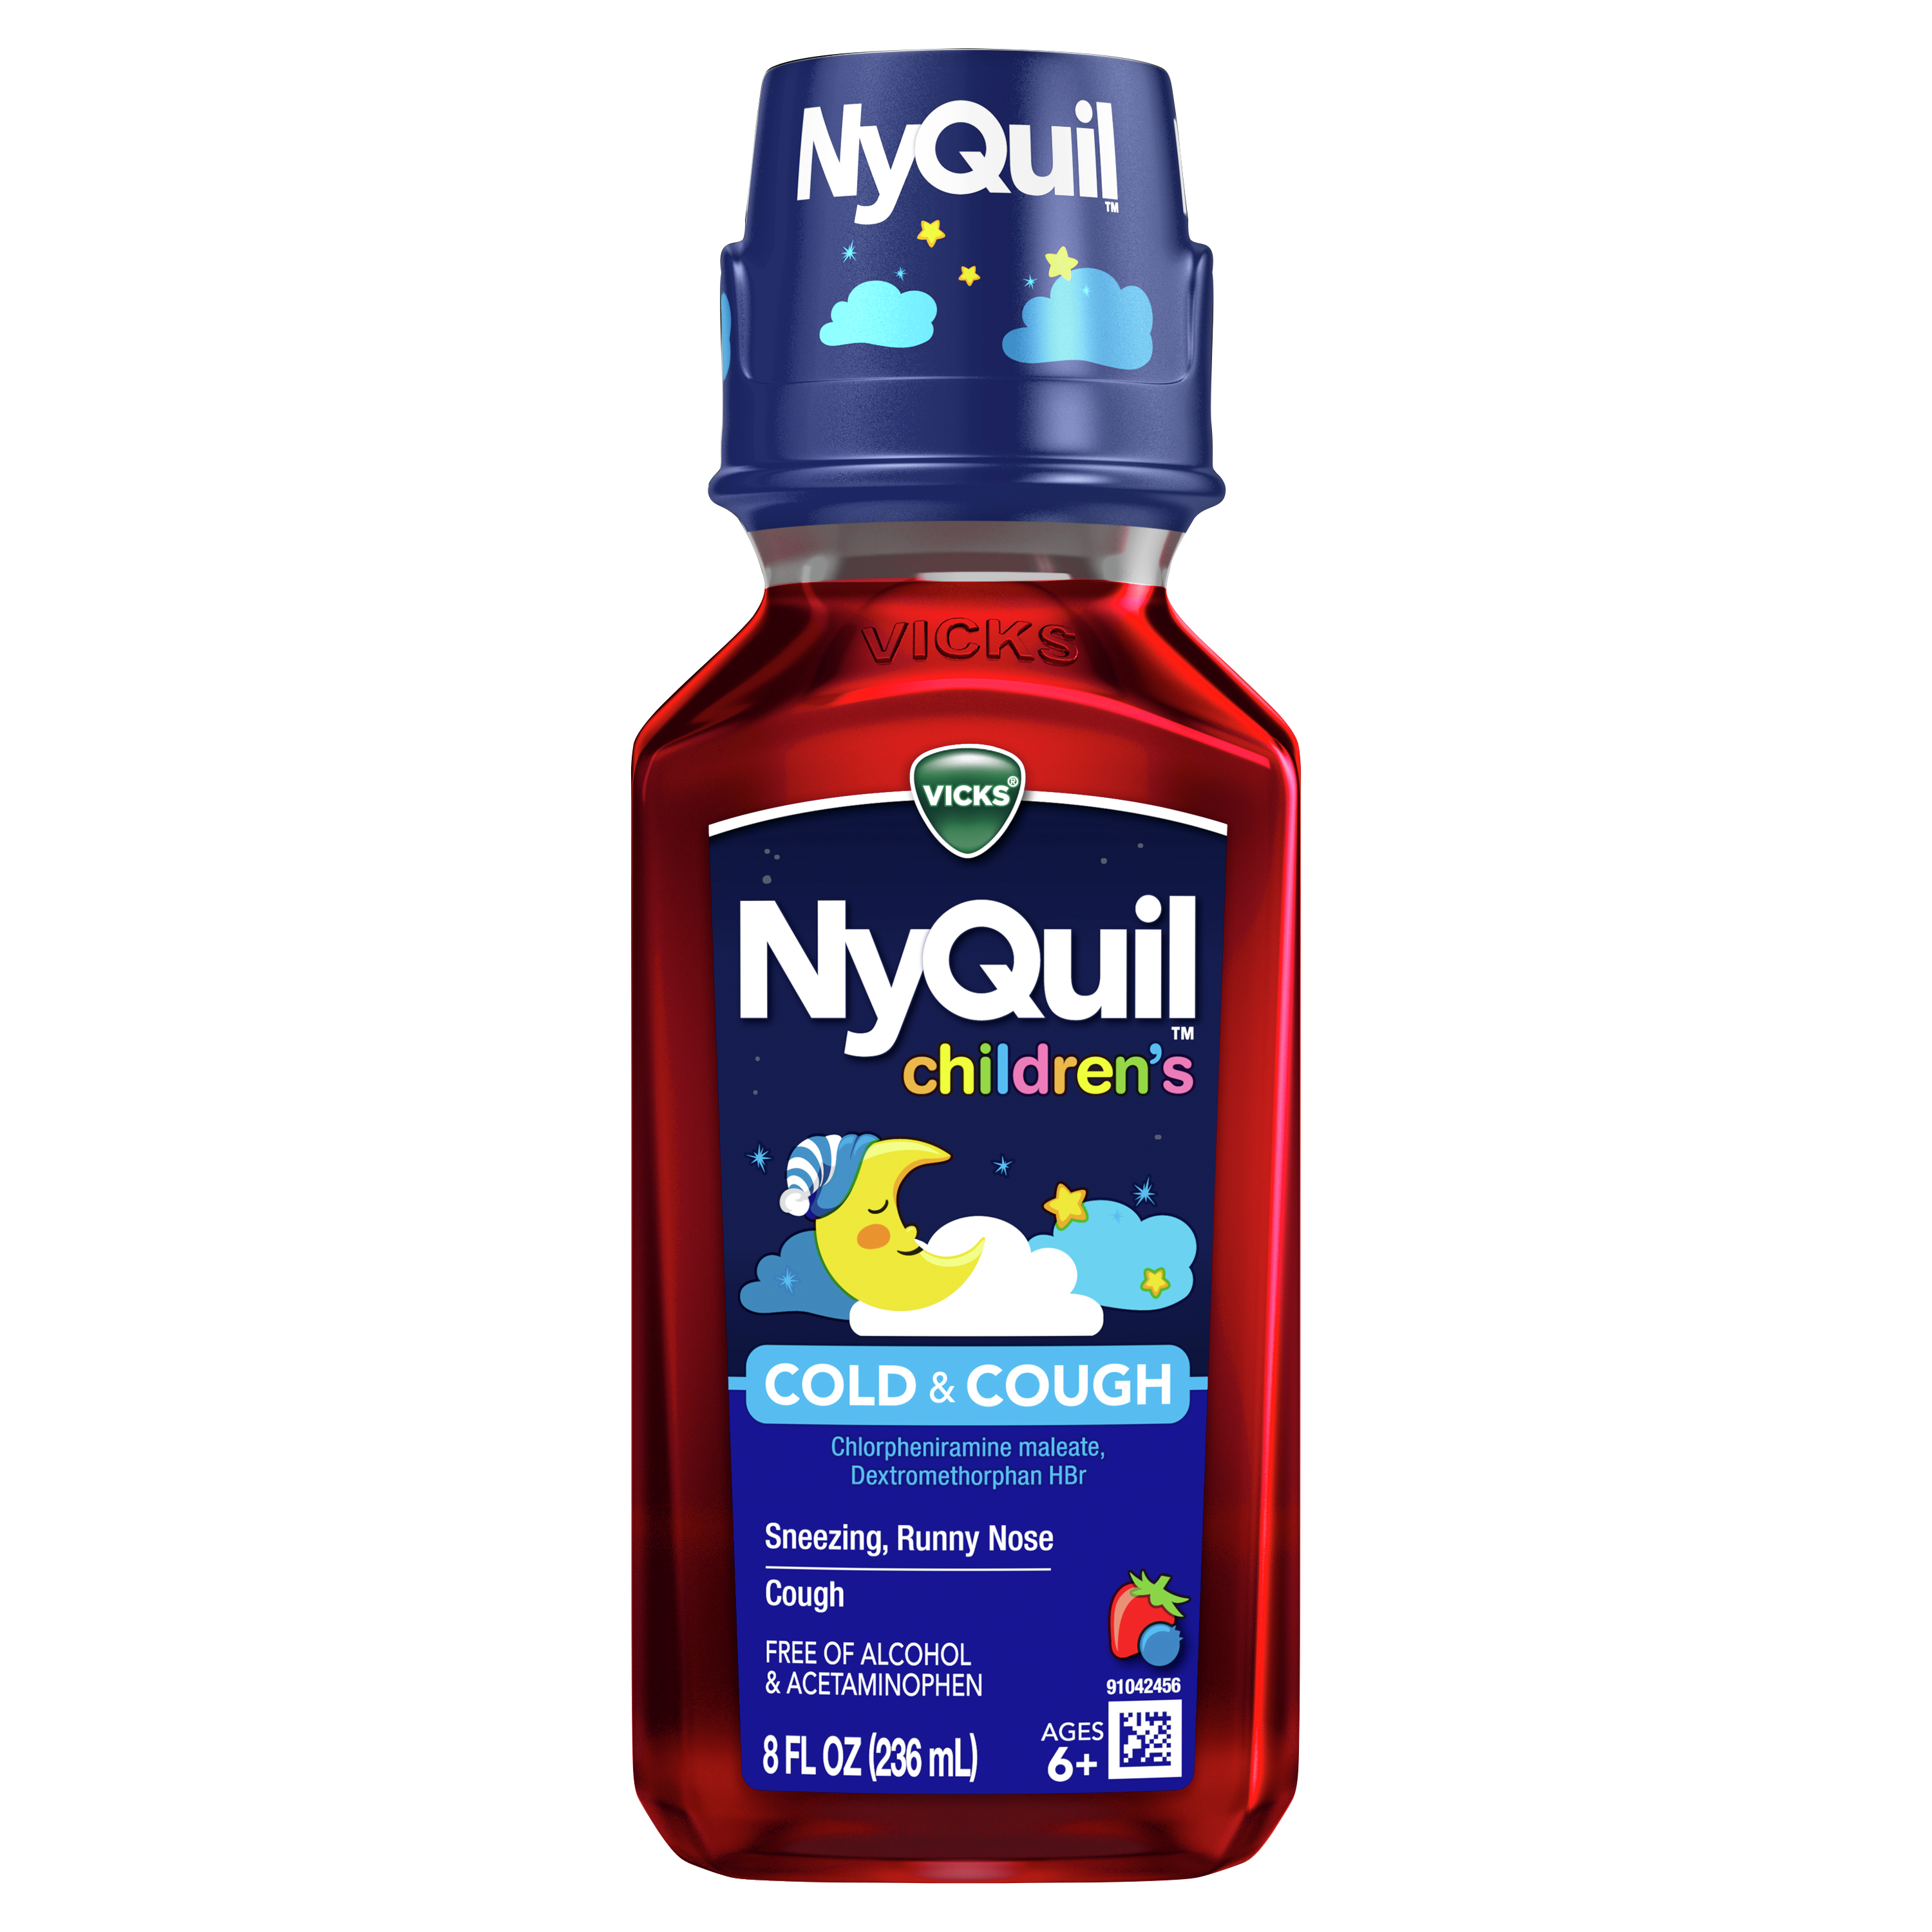 Children's NyQuil Cold & Cough Medicine - 236mL